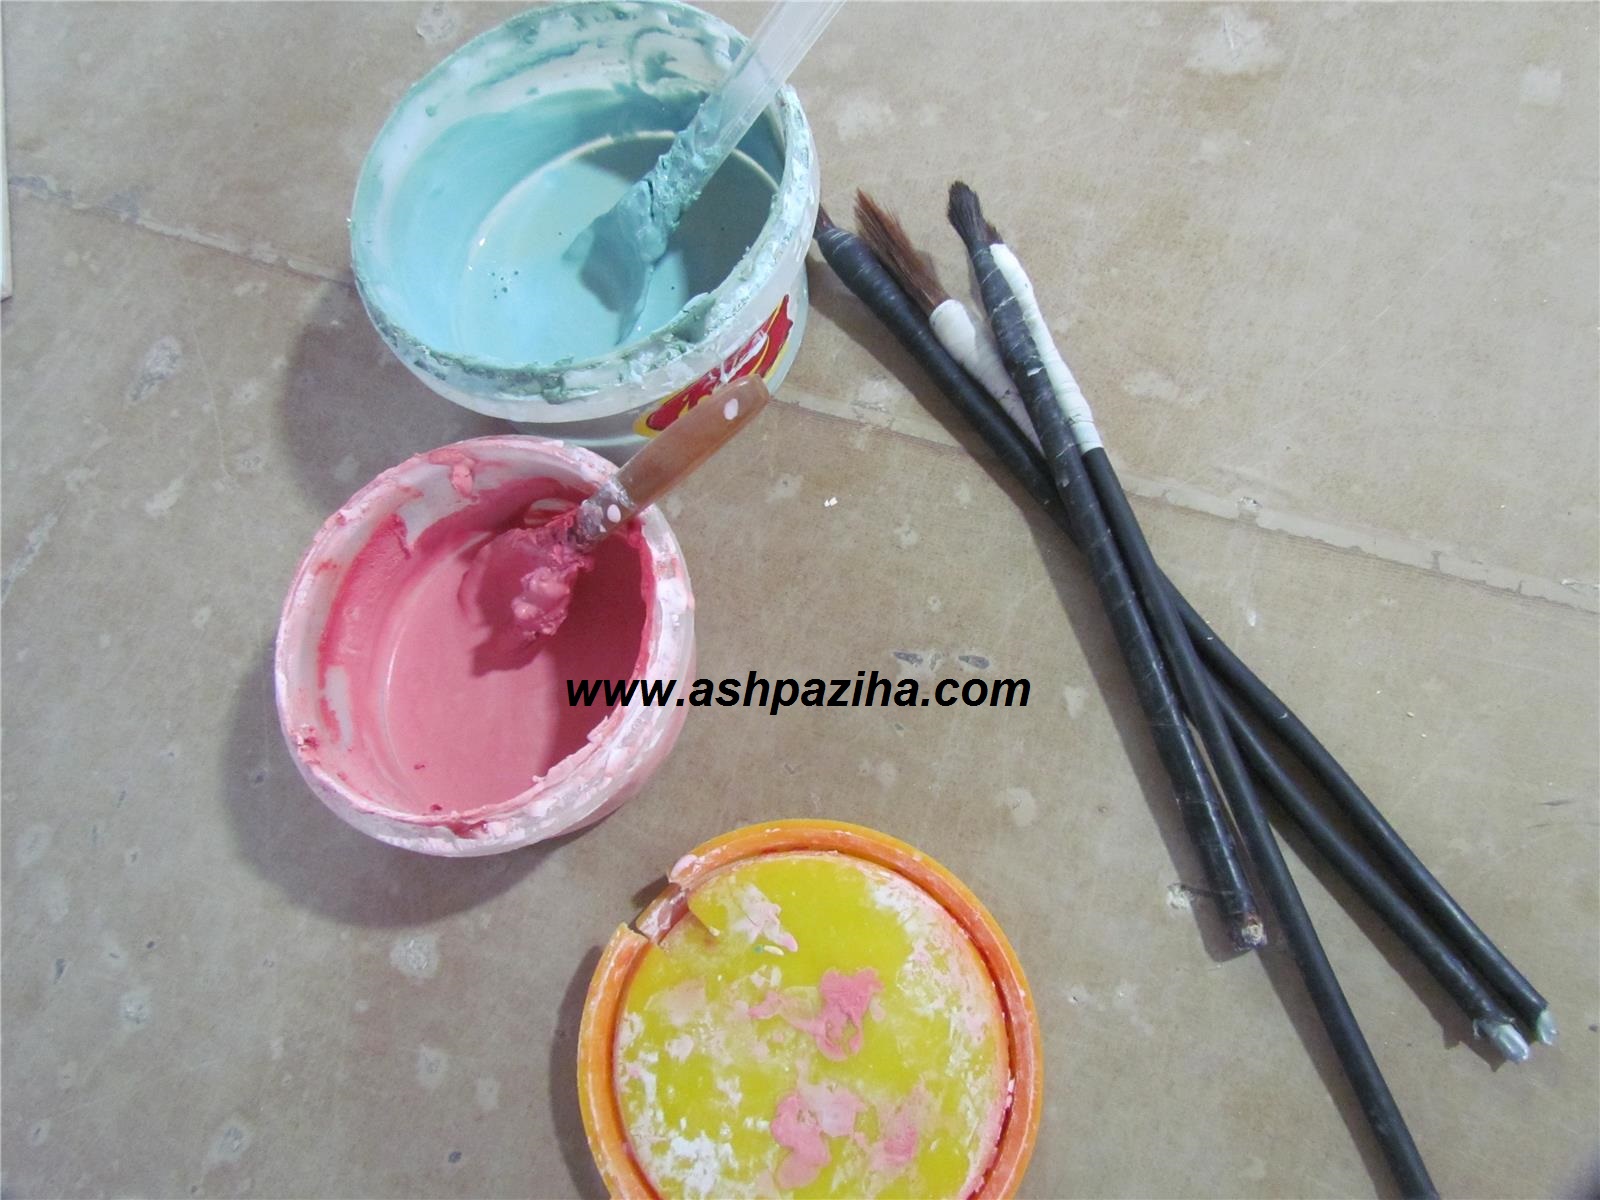 Educational - painting - and - designing - the - Tiles (6)